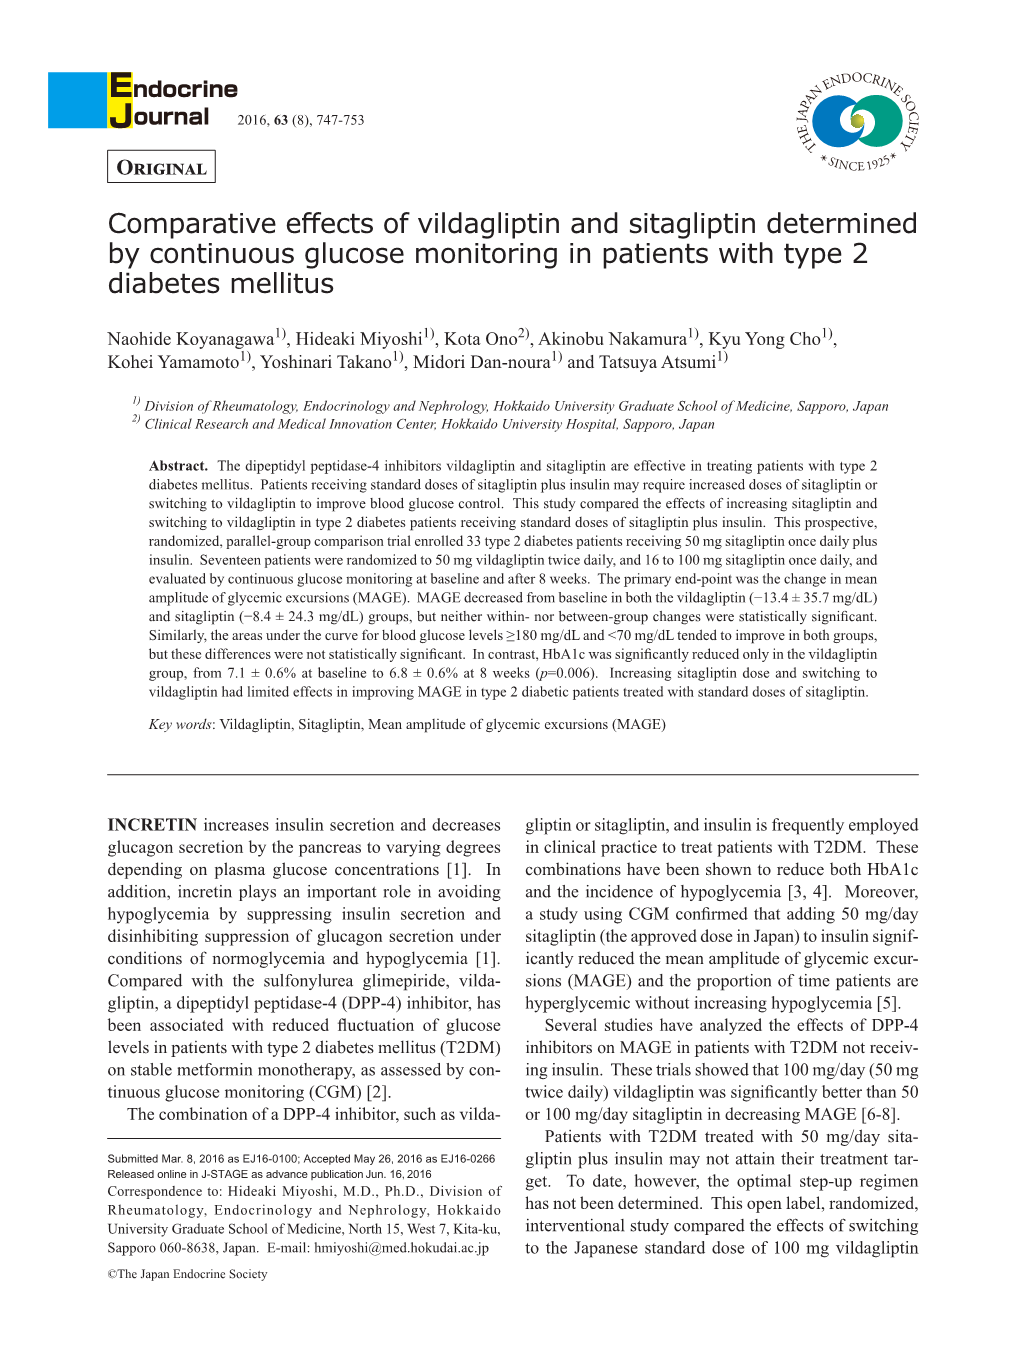 Comparative Effects of Vildagliptin and Sitagliptin Determined by Continuous Glucose Monitoring in Patients with Type 2 Diabetes Mellitus